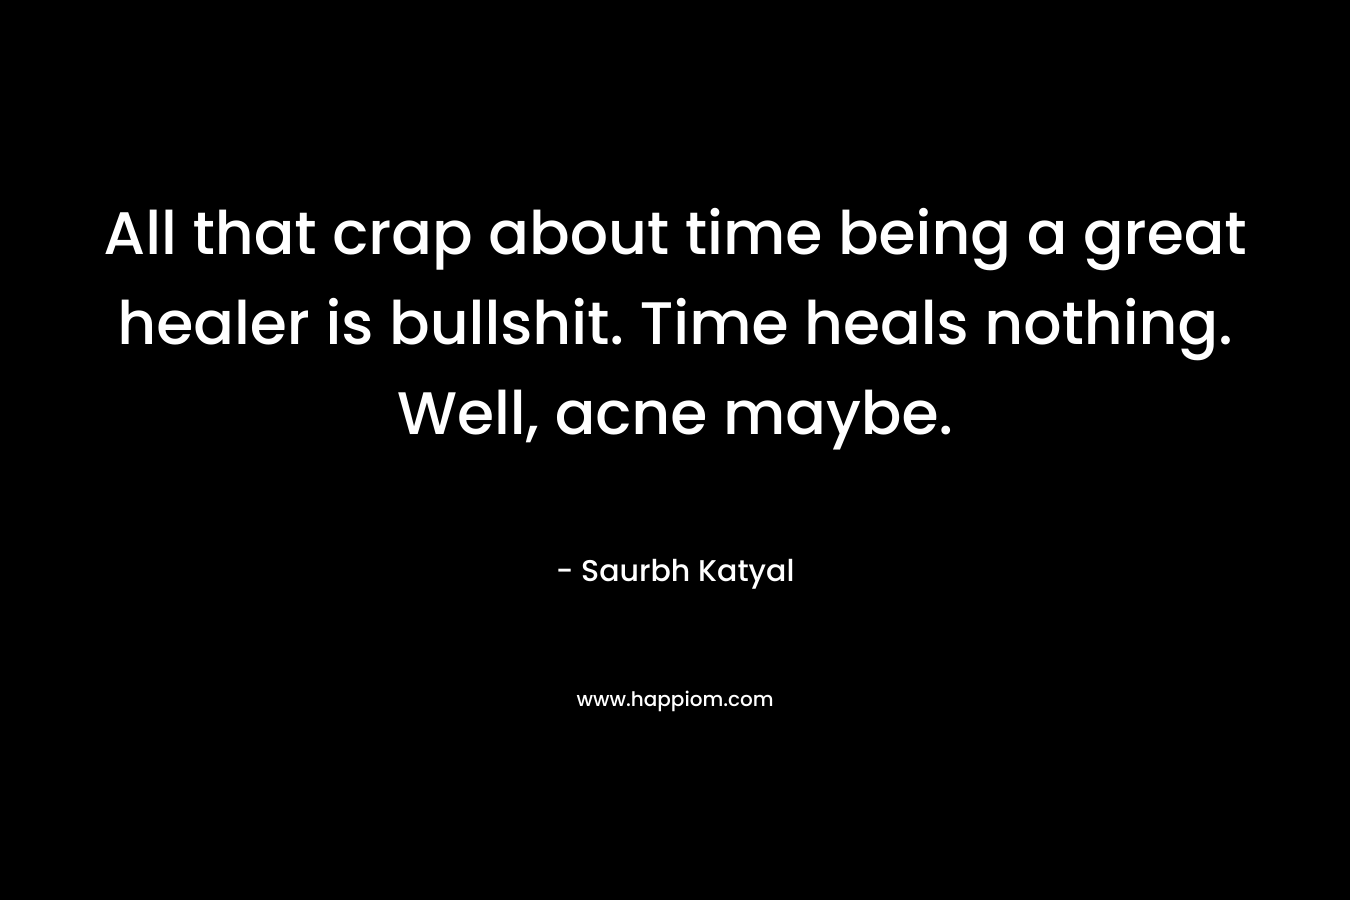 All that crap about time being a great healer is bullshit. Time heals nothing. Well, acne maybe. – Saurbh Katyal